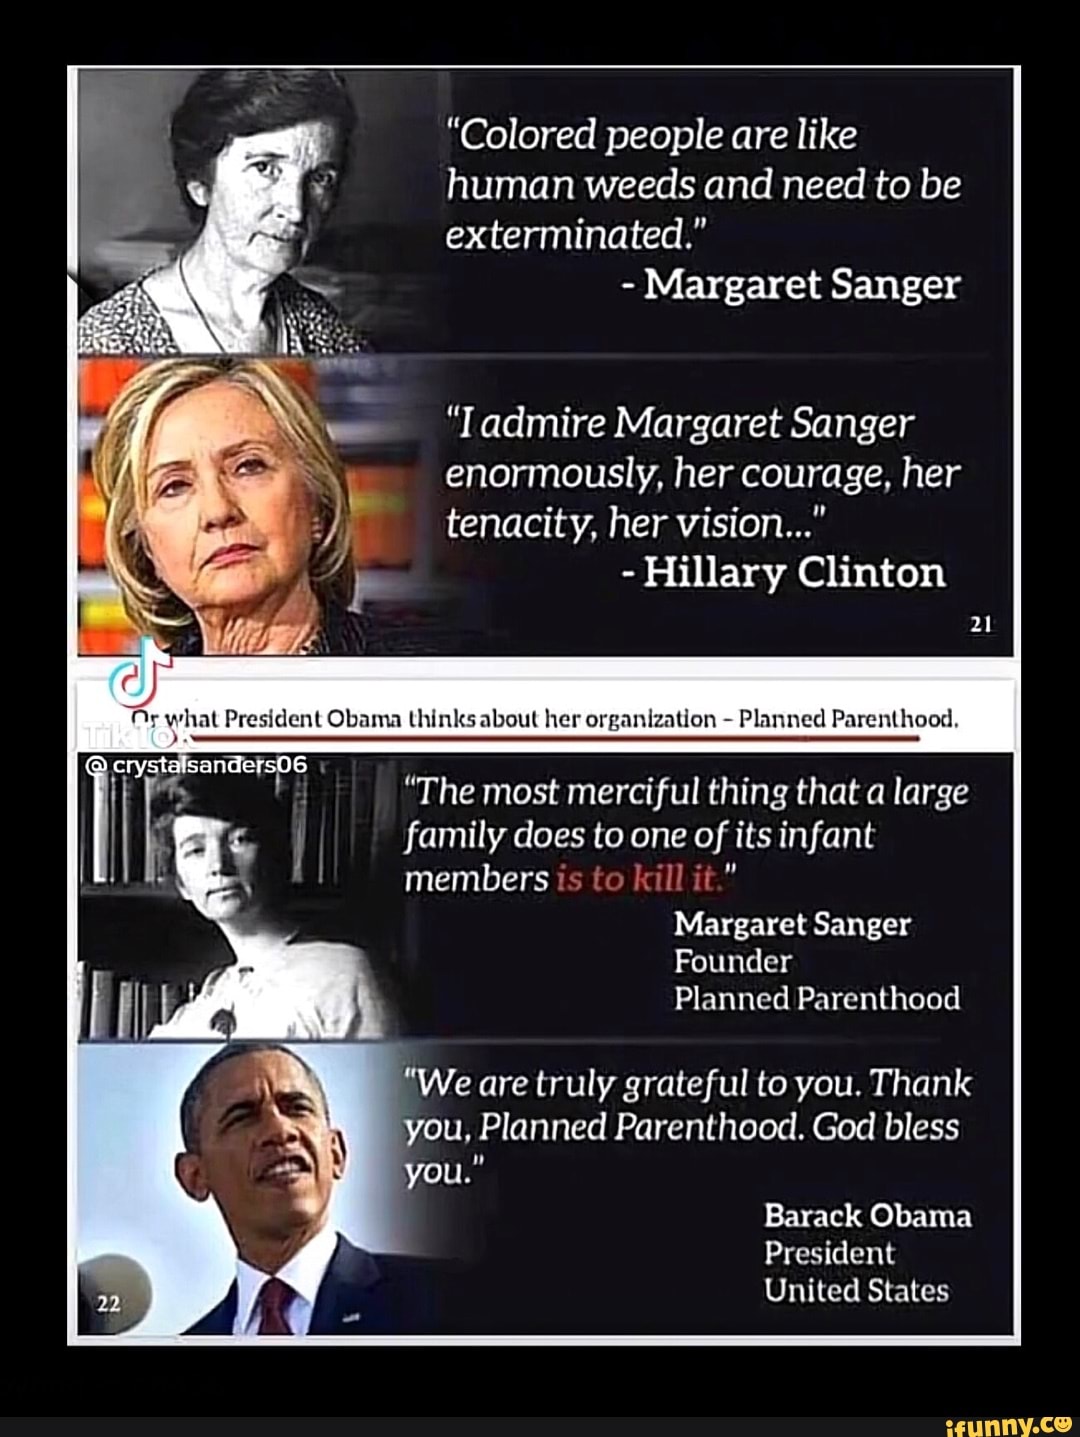 Colored people are like human weeds and need to be exterminated." - Margaret Sanger "admire Margaret Sanger